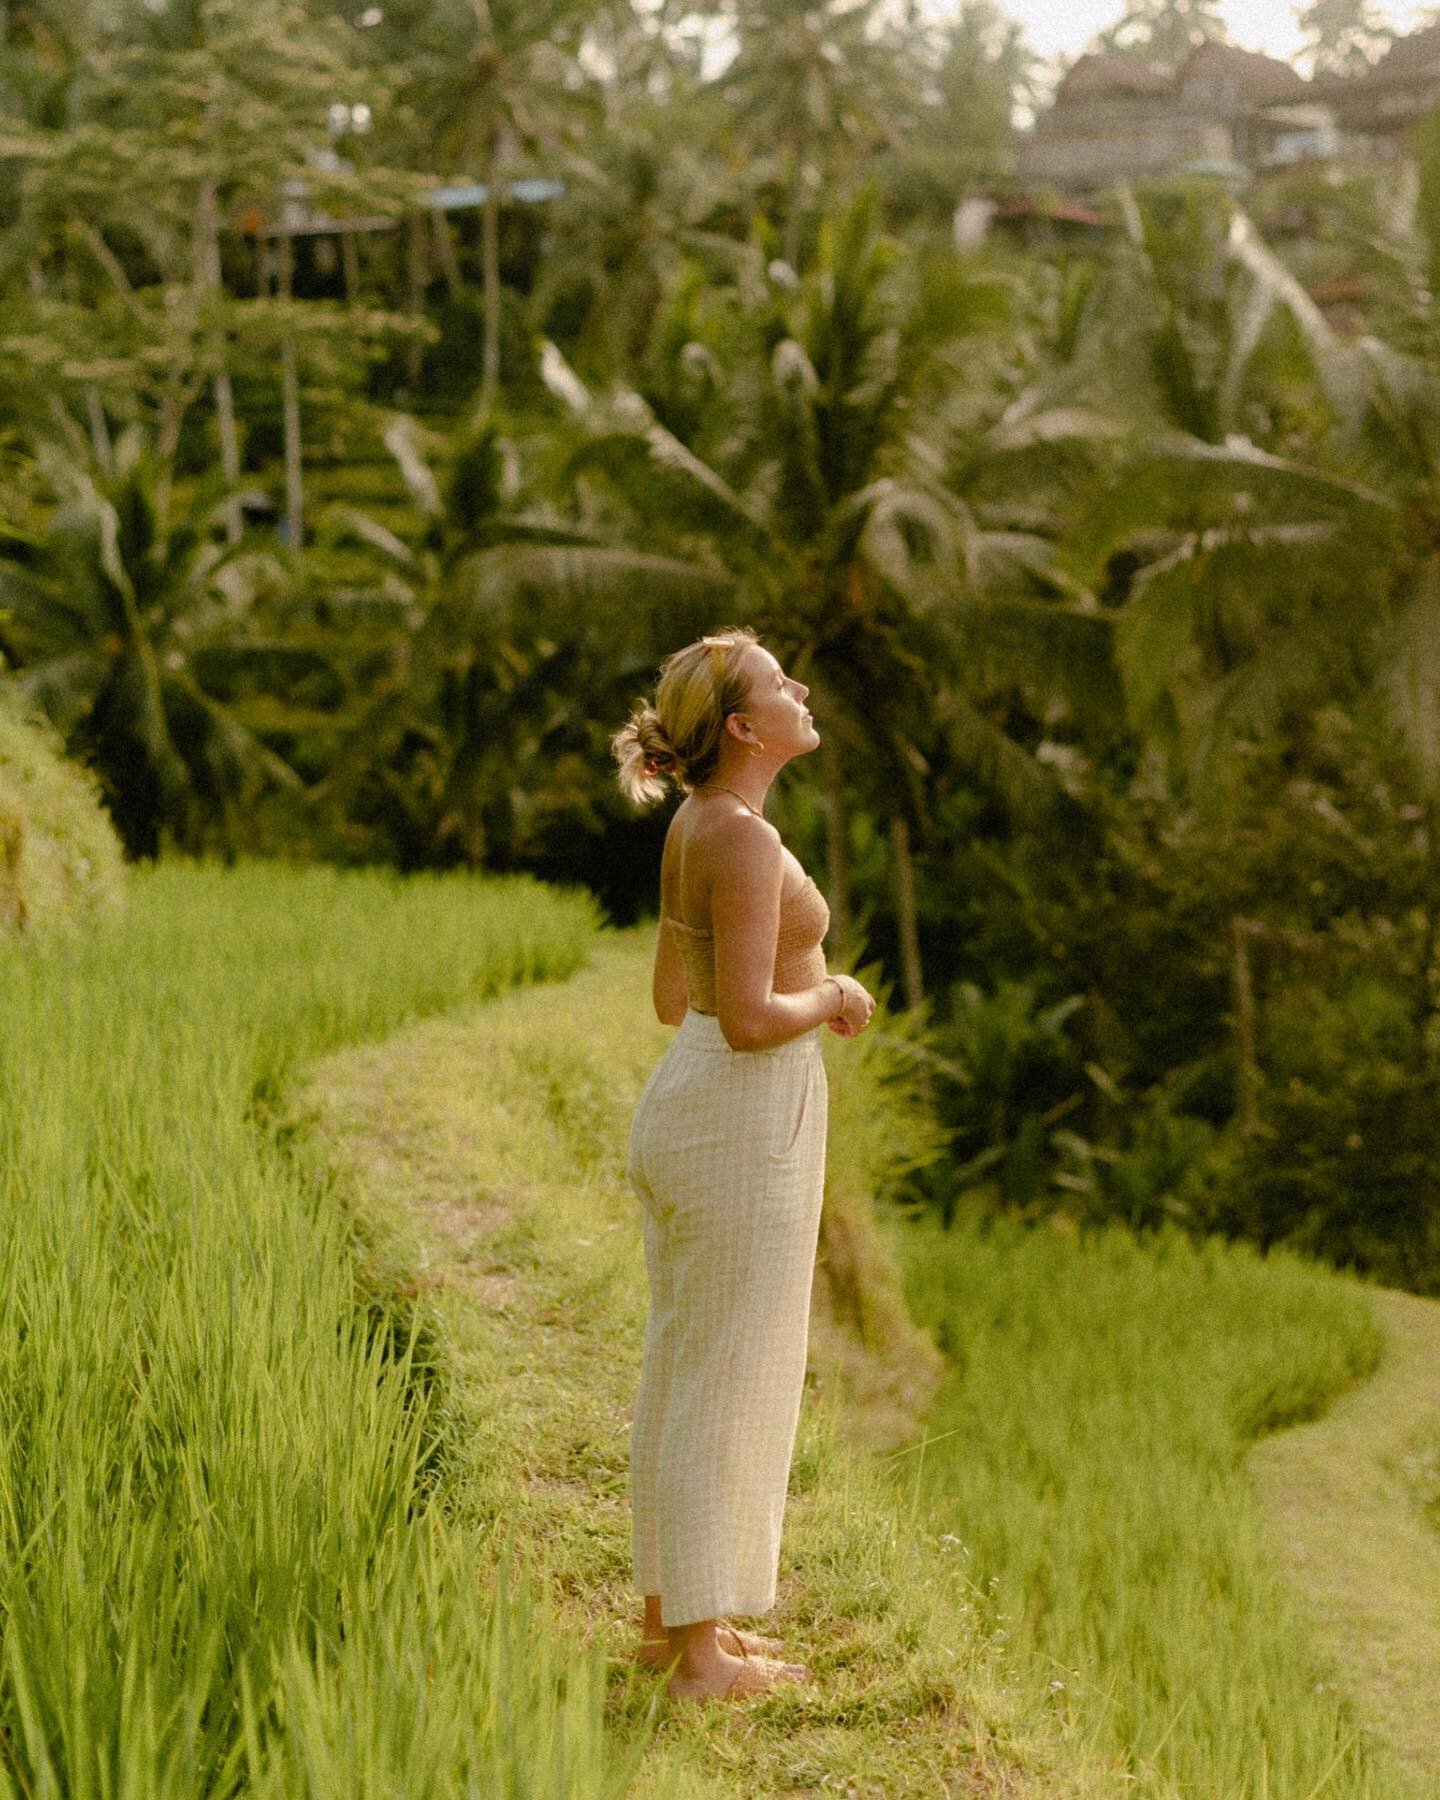 The trip that actually made it off of the Pinterest board 🌴

📸: the best travel mate @caitcollinsphotography 

#balitravel #baliricefields #baliriceterrace #riceterracebali #ubudbali #ubudlife #ubudricefields #ubudtravel #baliblog #femaletravel #fe